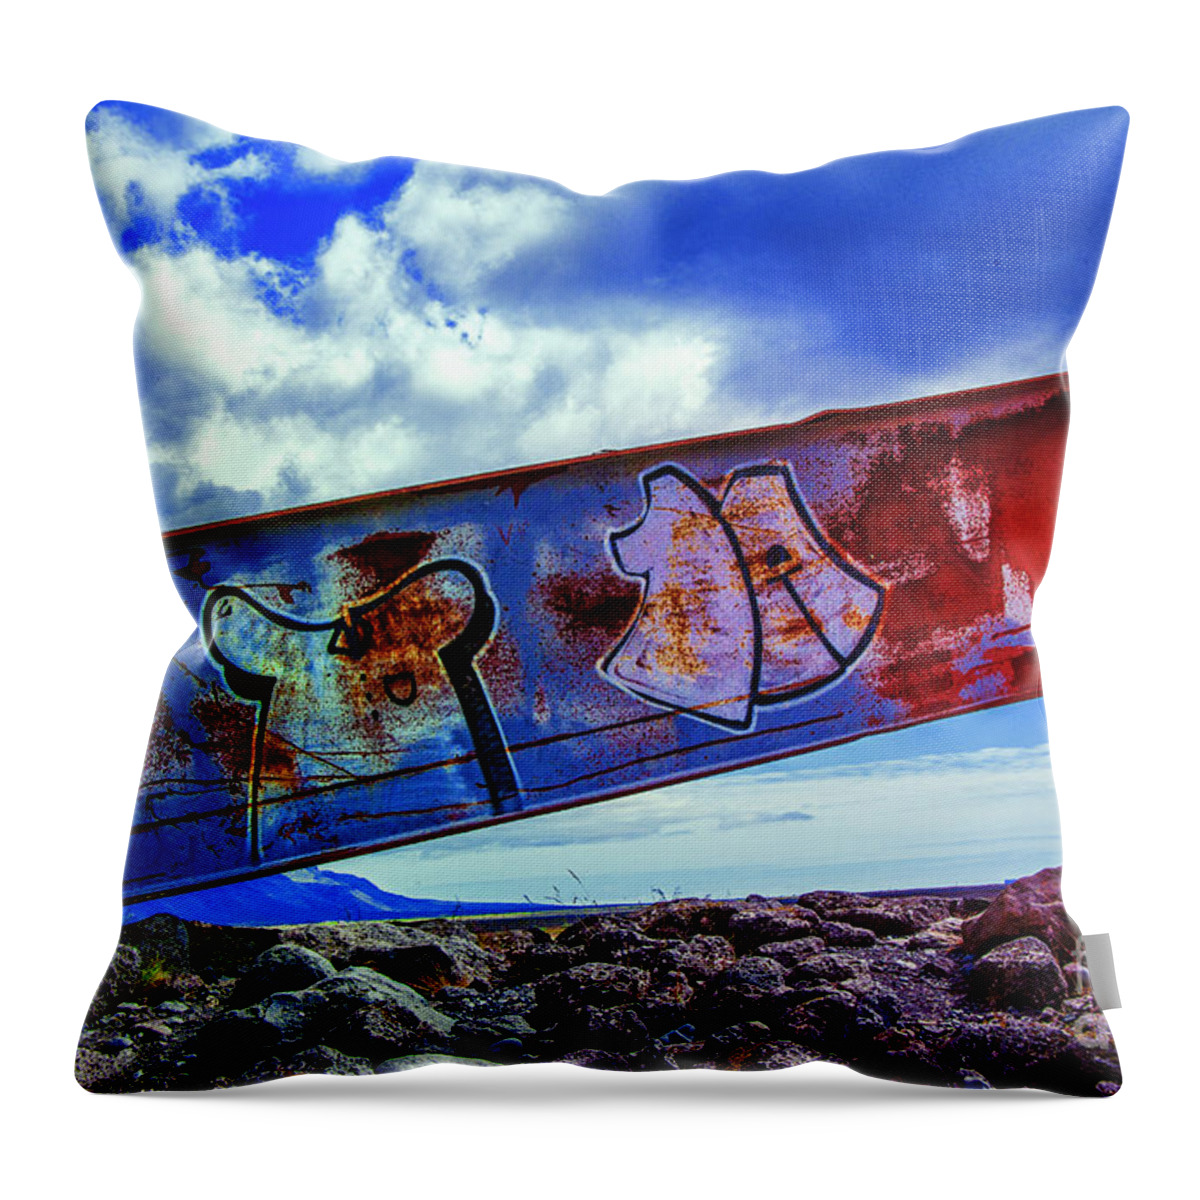 Iceland Volcano Eruptions Throw Pillow featuring the photograph Broken Steele by Rick Bragan